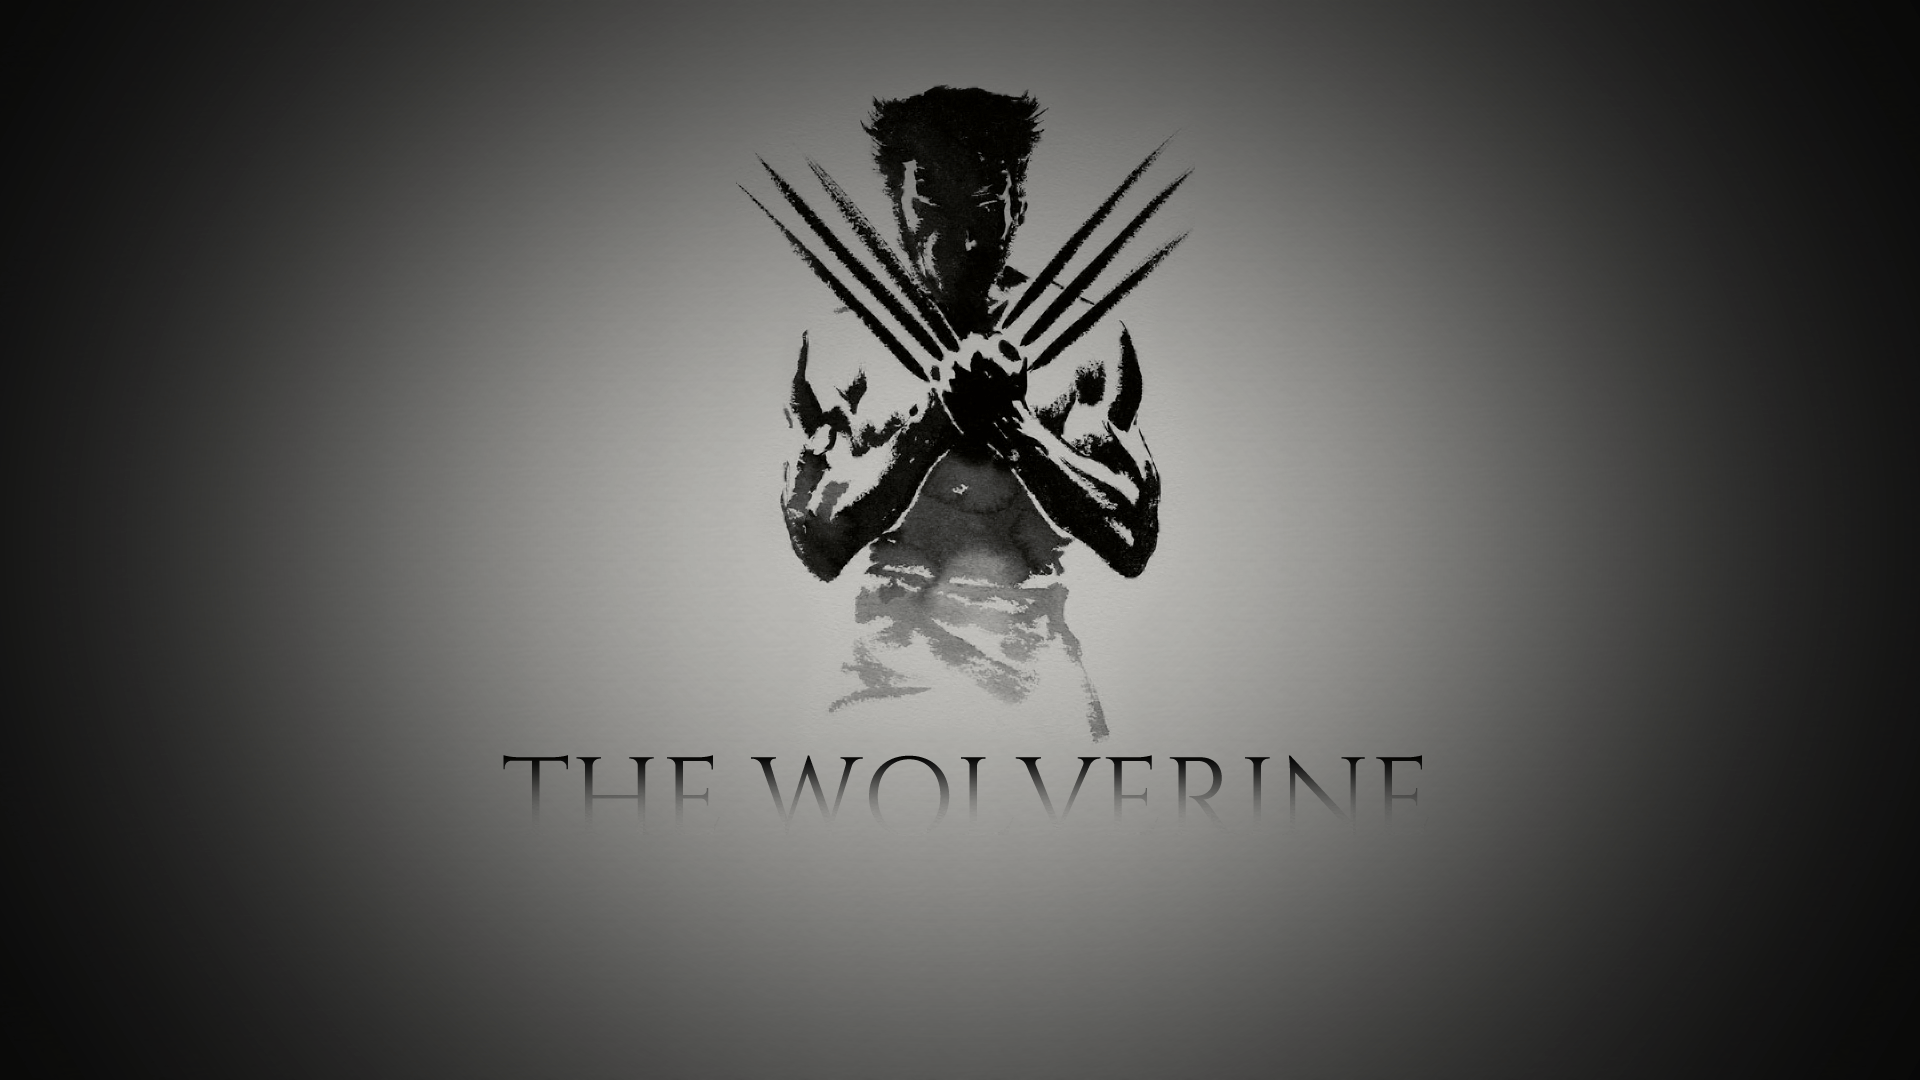 The Wolverine Wallpaper The Wolverine 2K wallpapers and backgrounds